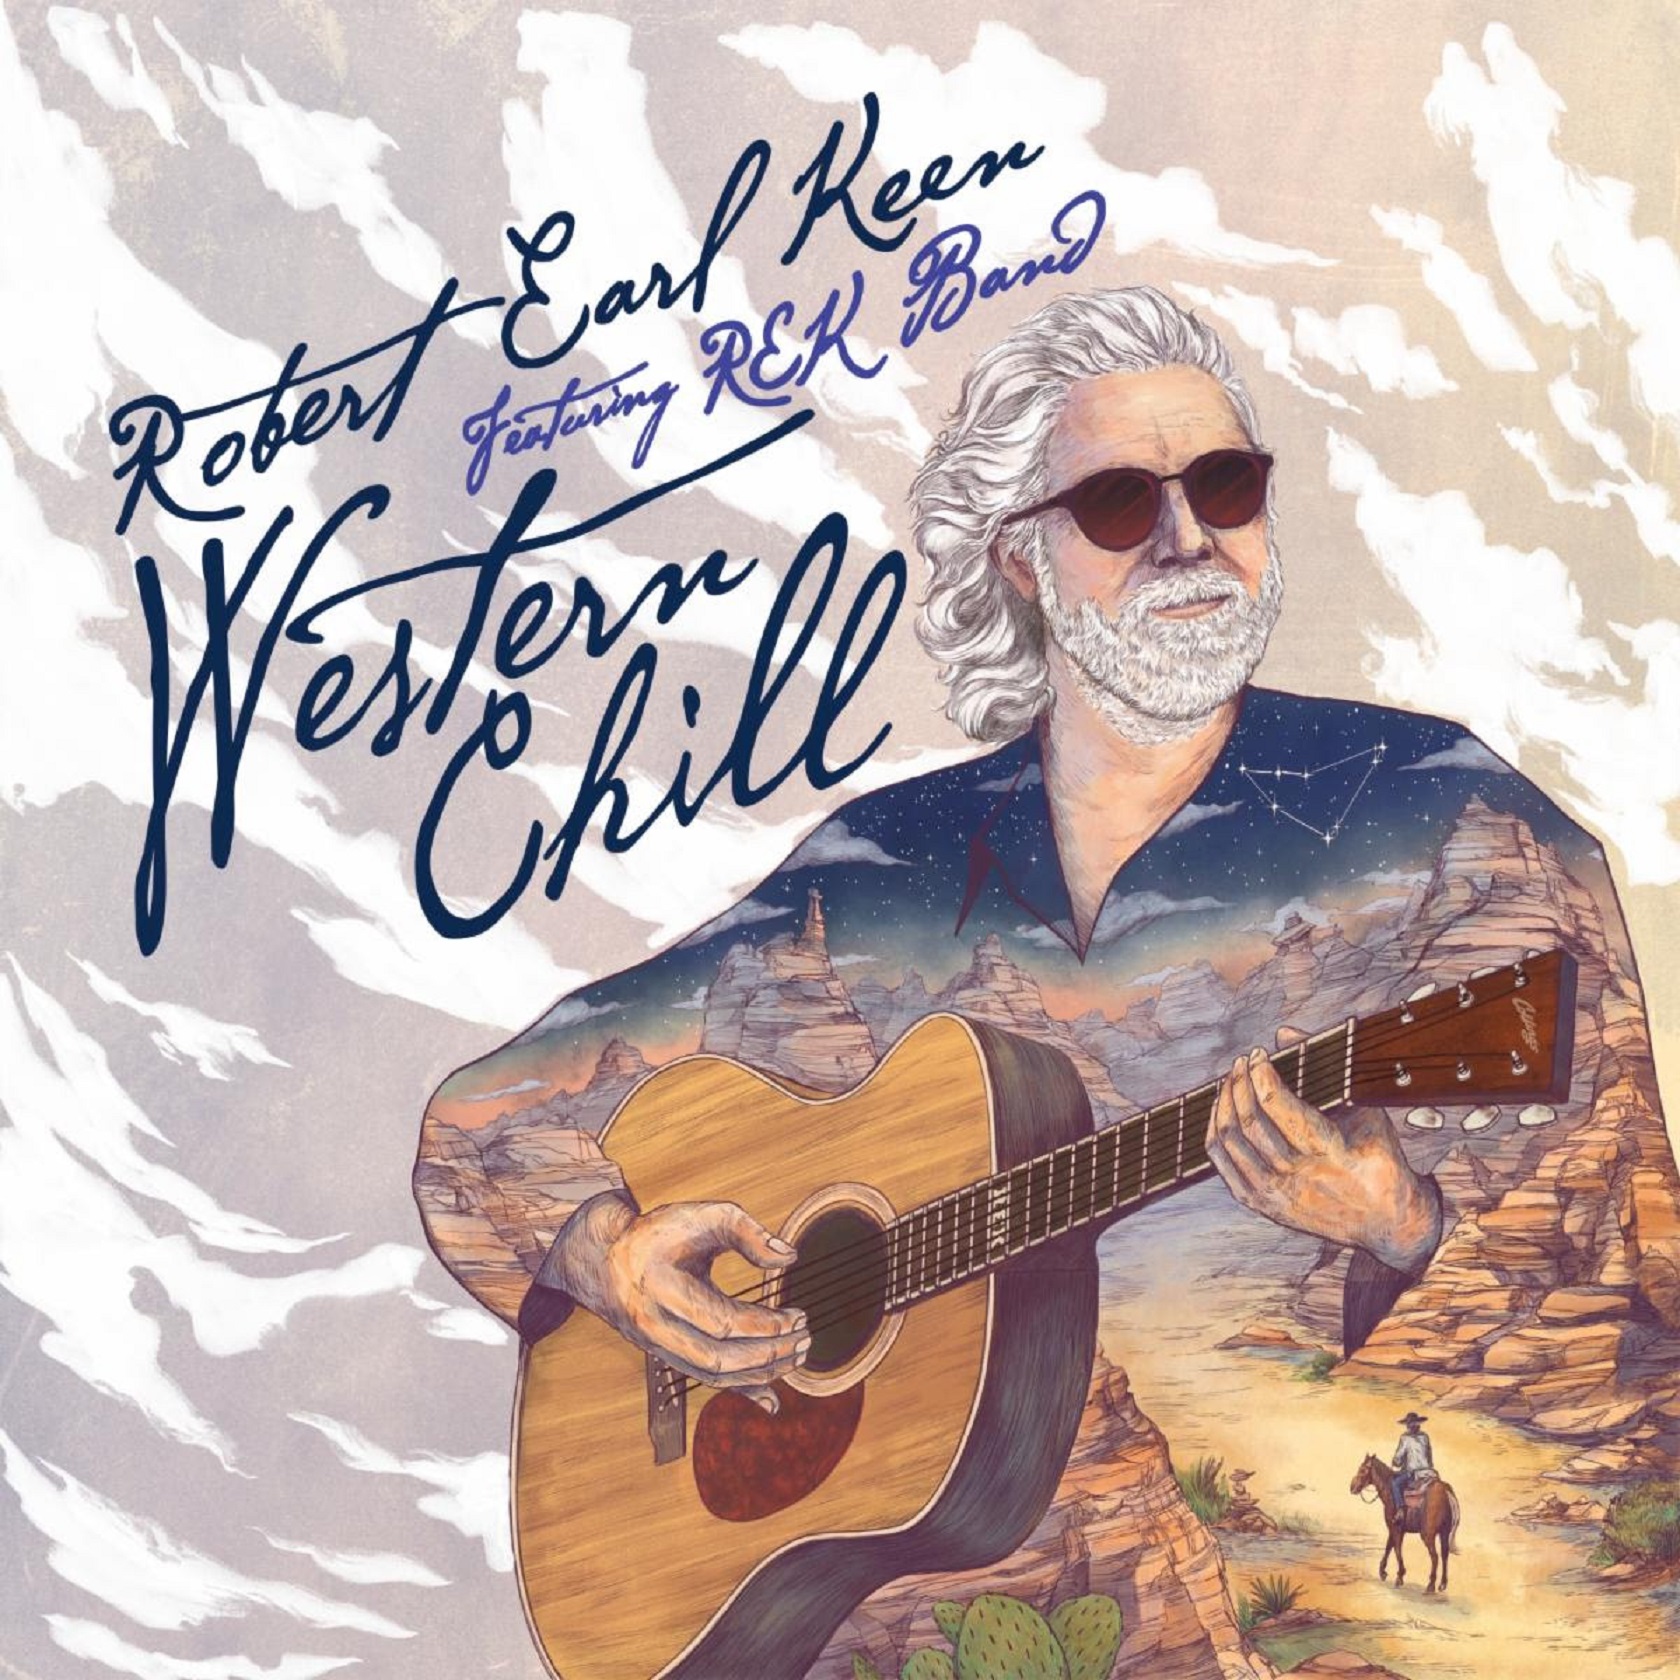 The Robert Earl Keen Band Eases Into Retirement From The Road With Brand New, Laid Back LP, Western Chill